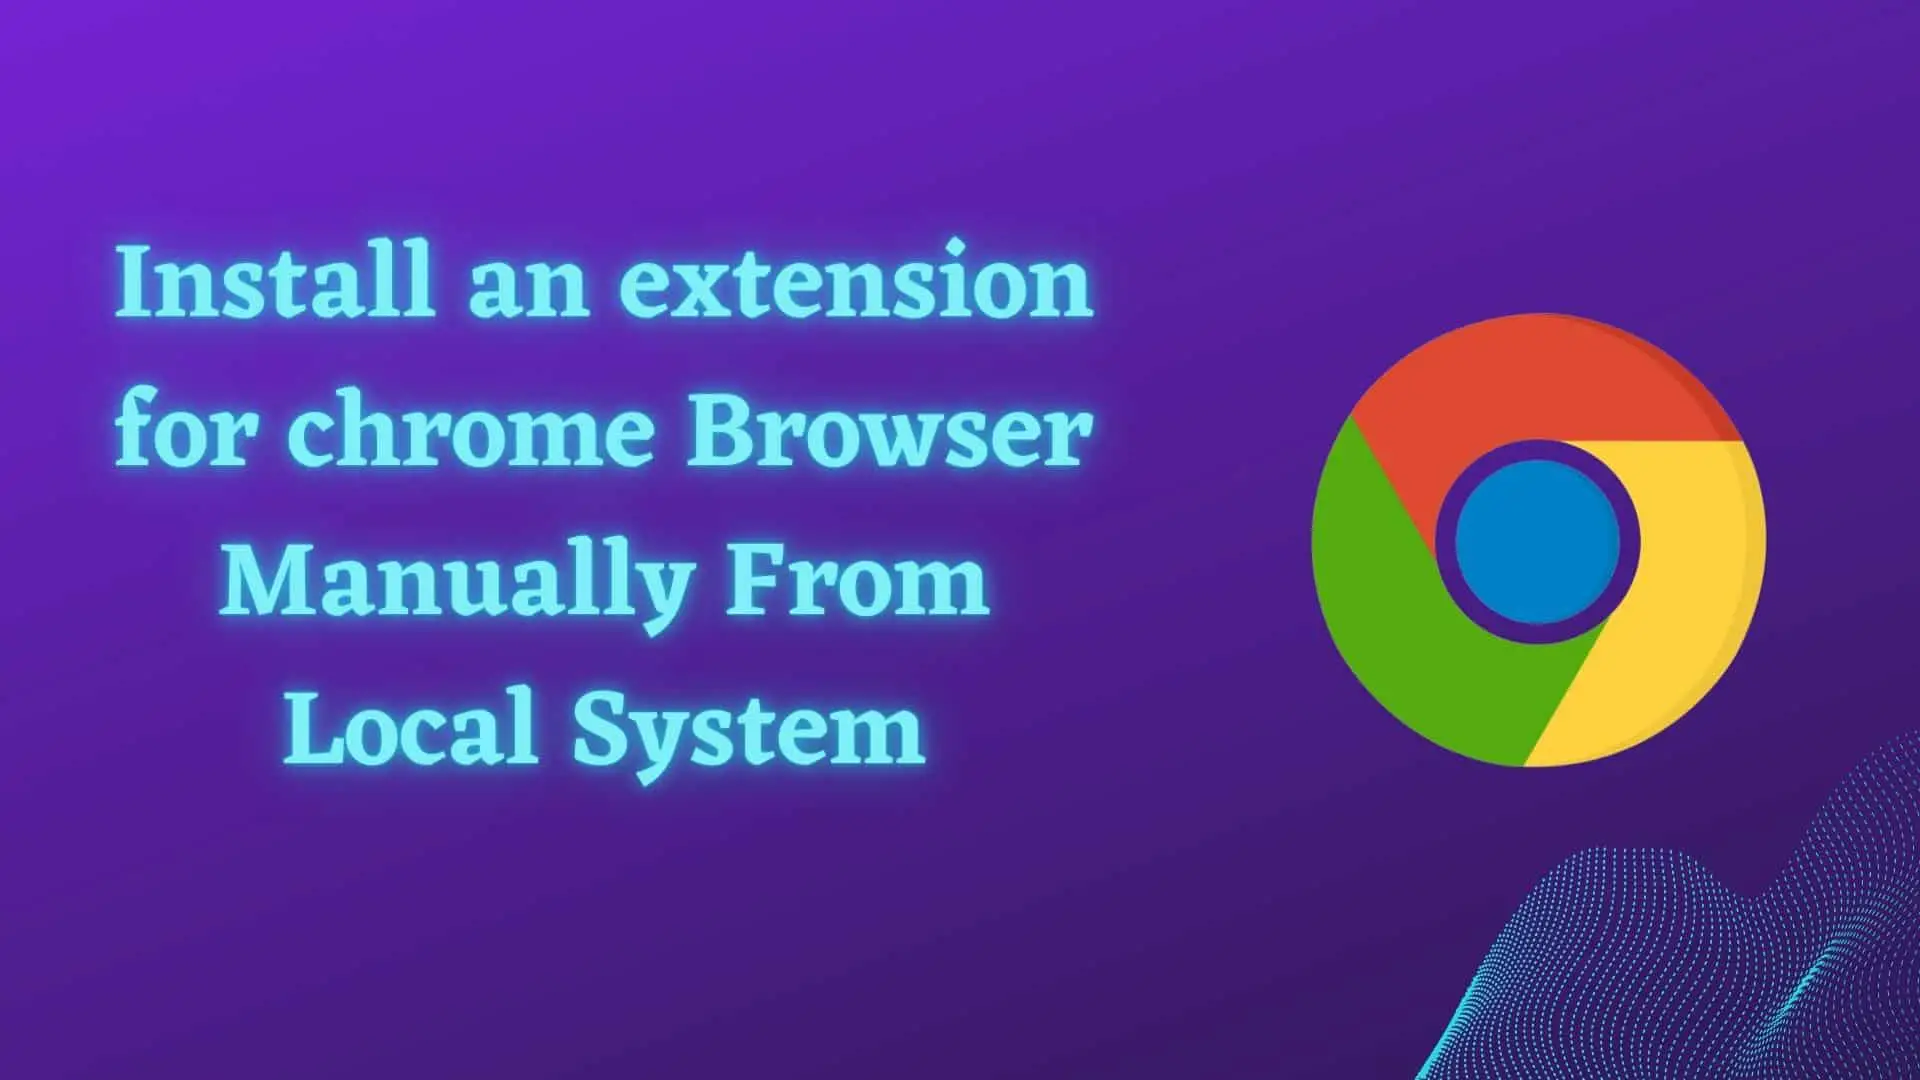 manually-locally-install-chrome-extension